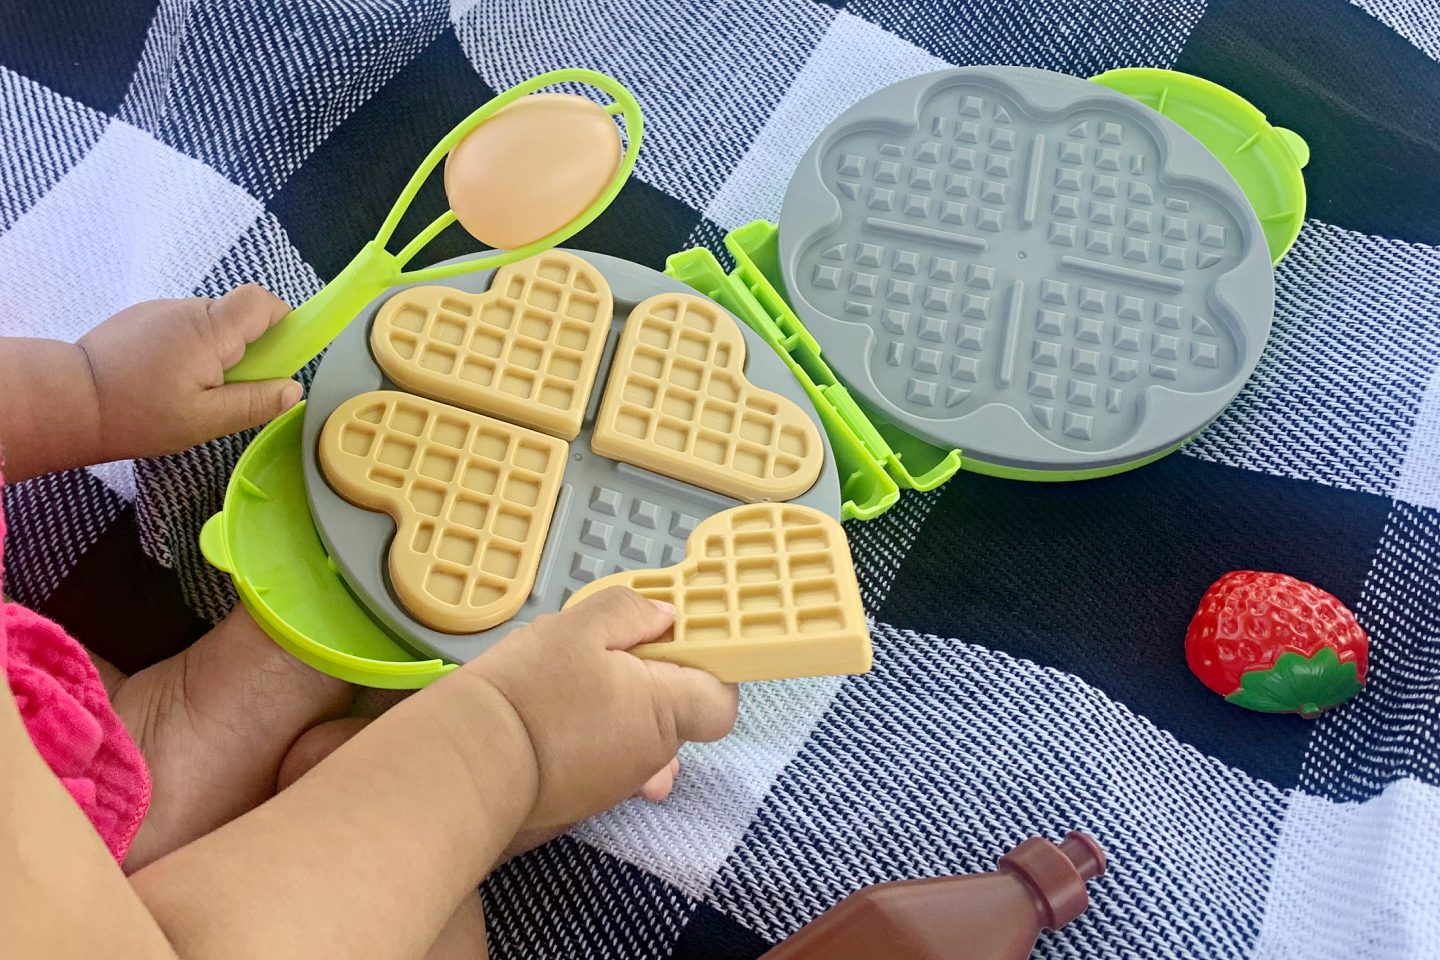 https://justbrennonblog.com/wp-content/uploads/2023/06/National-Waffle-Iron-Day-Playset-11-1440x960.jpg